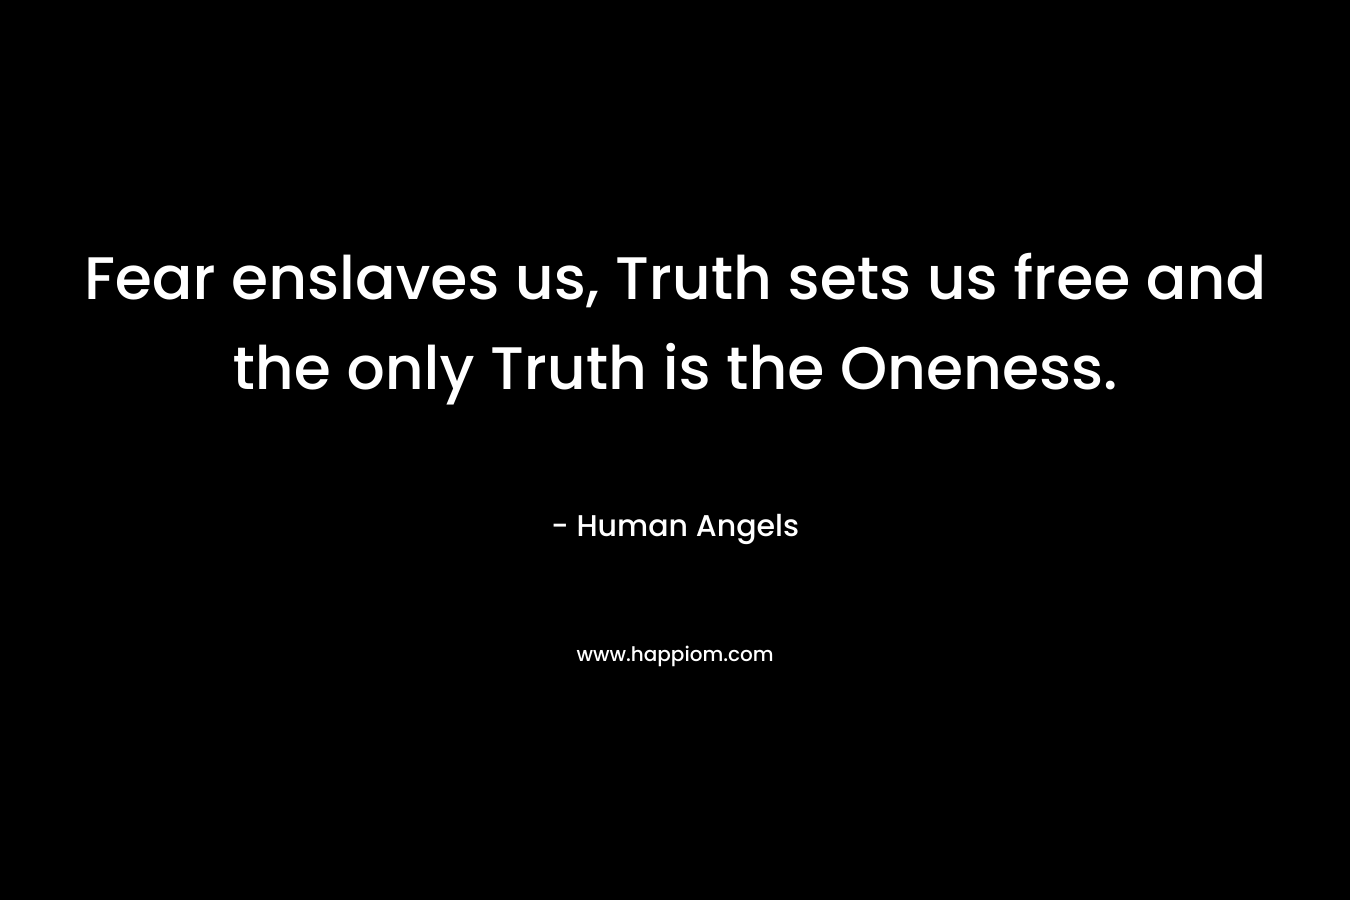 Fear enslaves us, Truth sets us free and the only Truth is the Oneness.